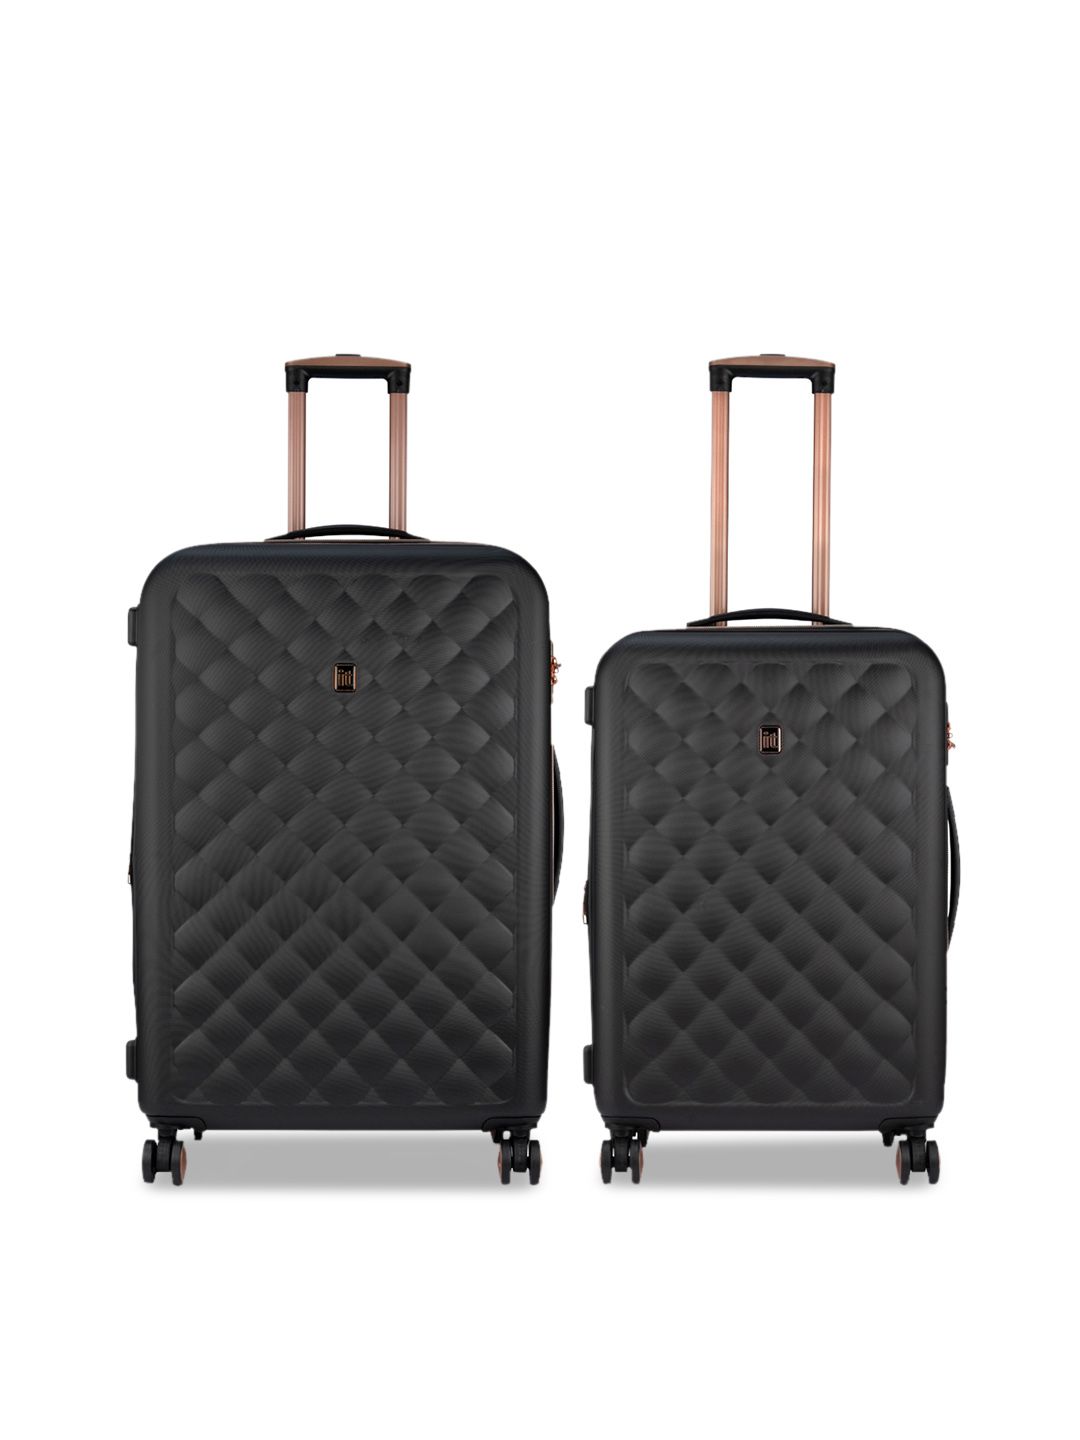 IT luggage Set Of 2 Black Textured Trolley Bag Price in India